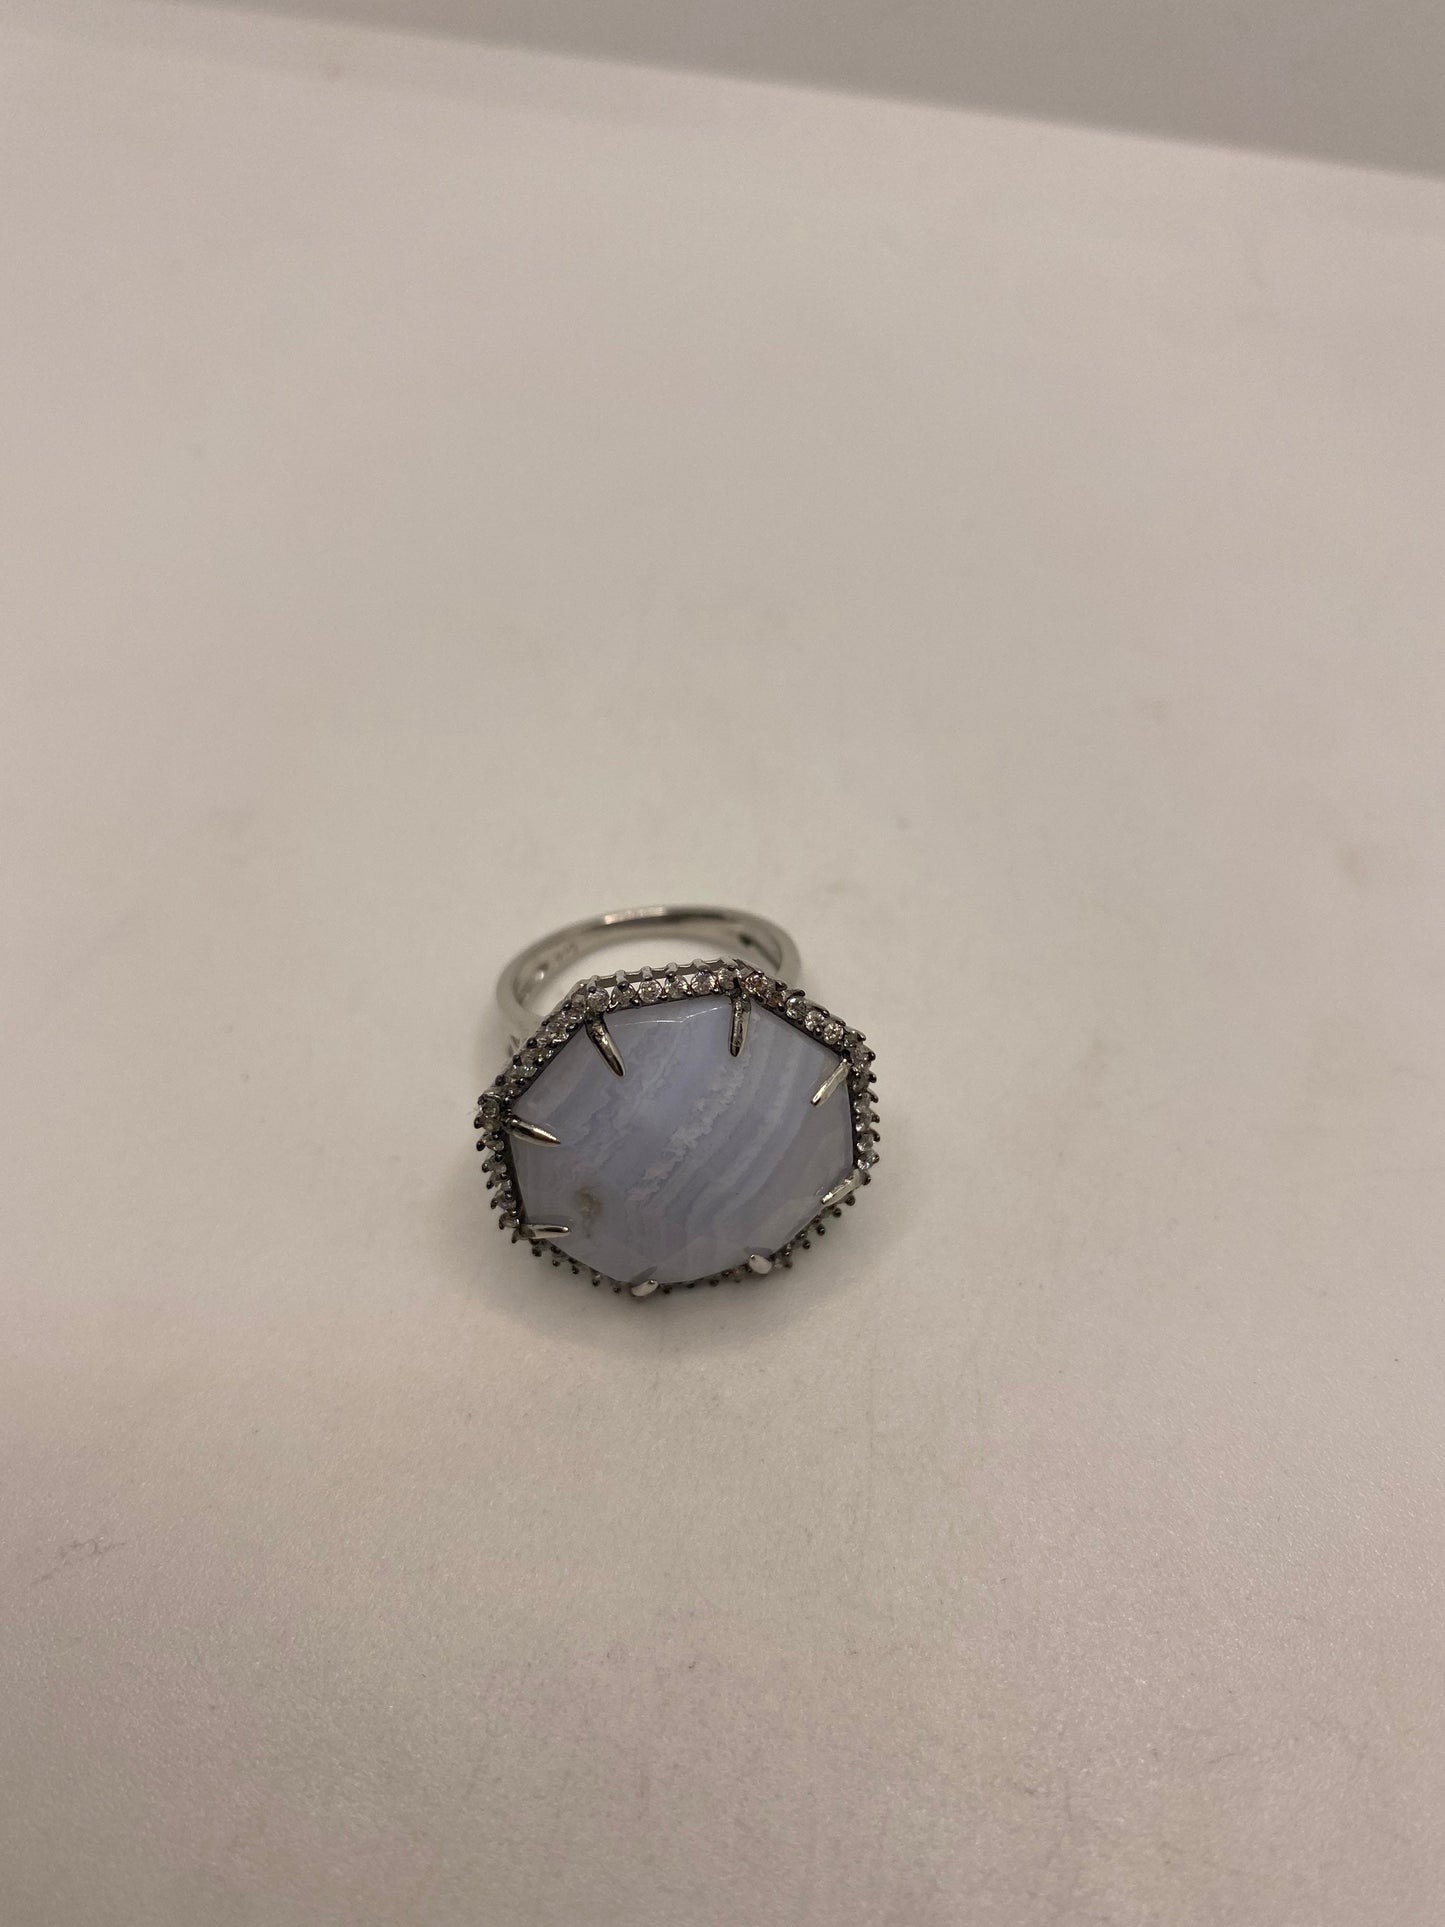 Vintage Blue Lace Agate Ring 925 Sterling Silver